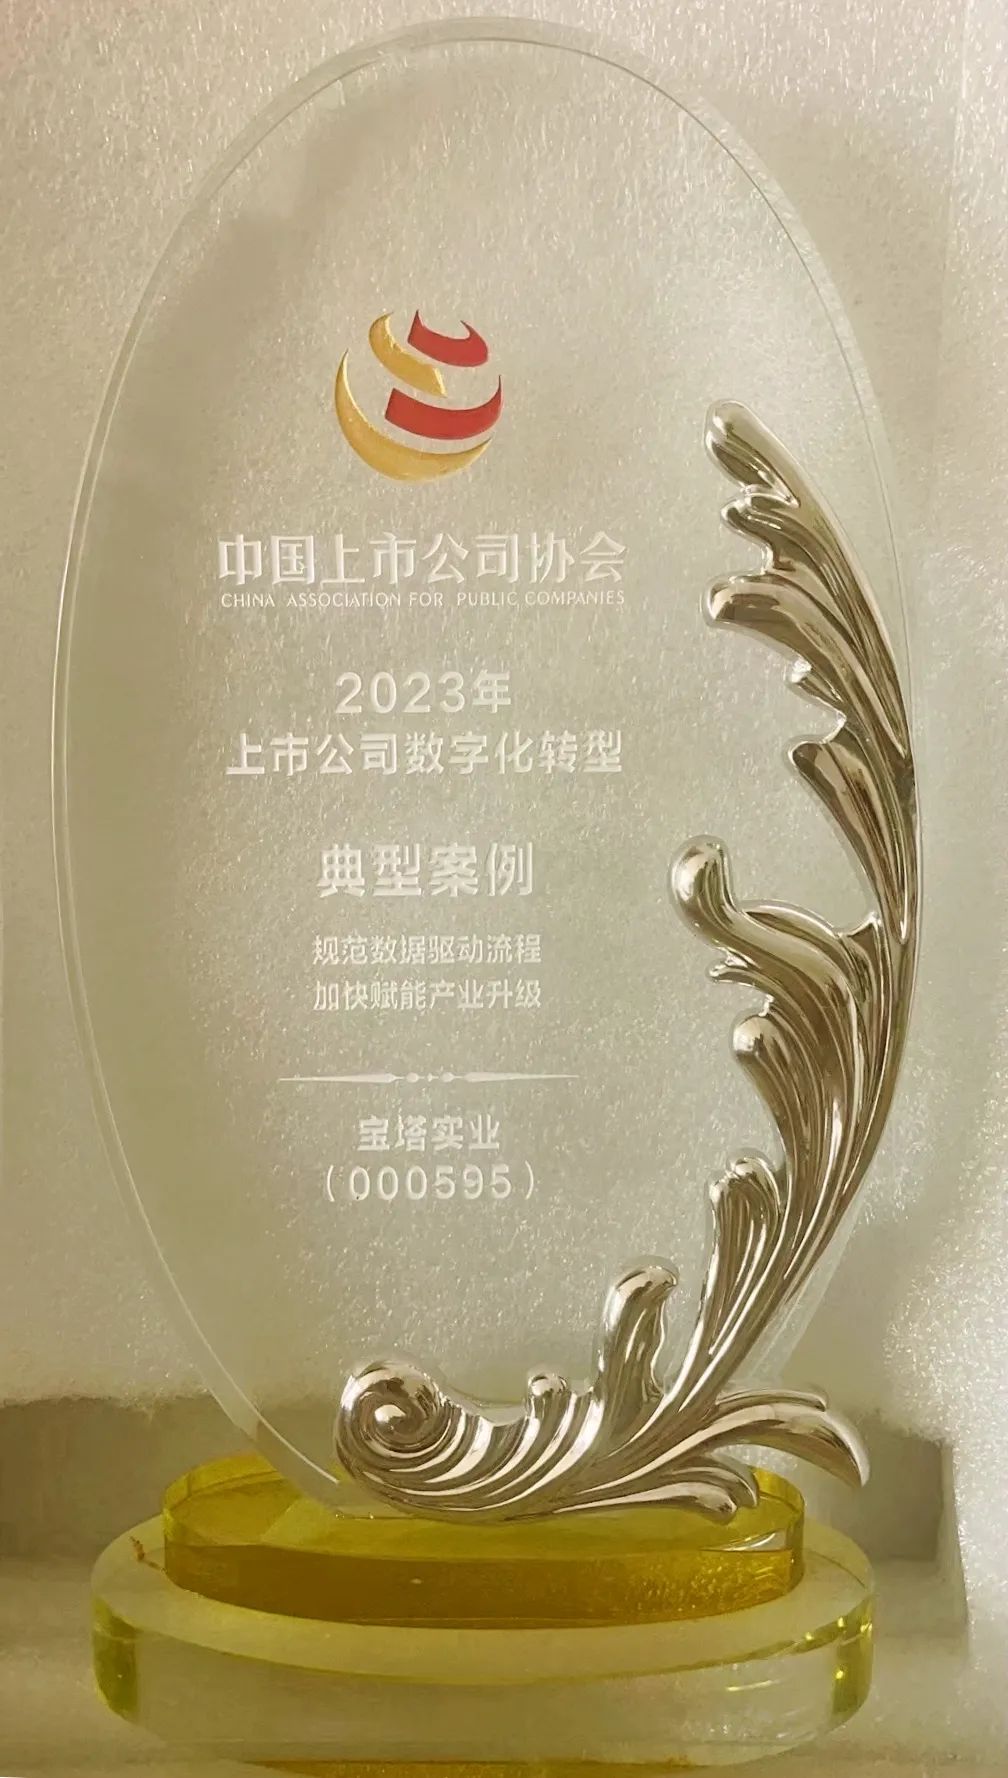 Good newsXiBei Bearing Co., Ltd (NXZ) won the award of "Typical Case of Digital transformation of Listed Companies"